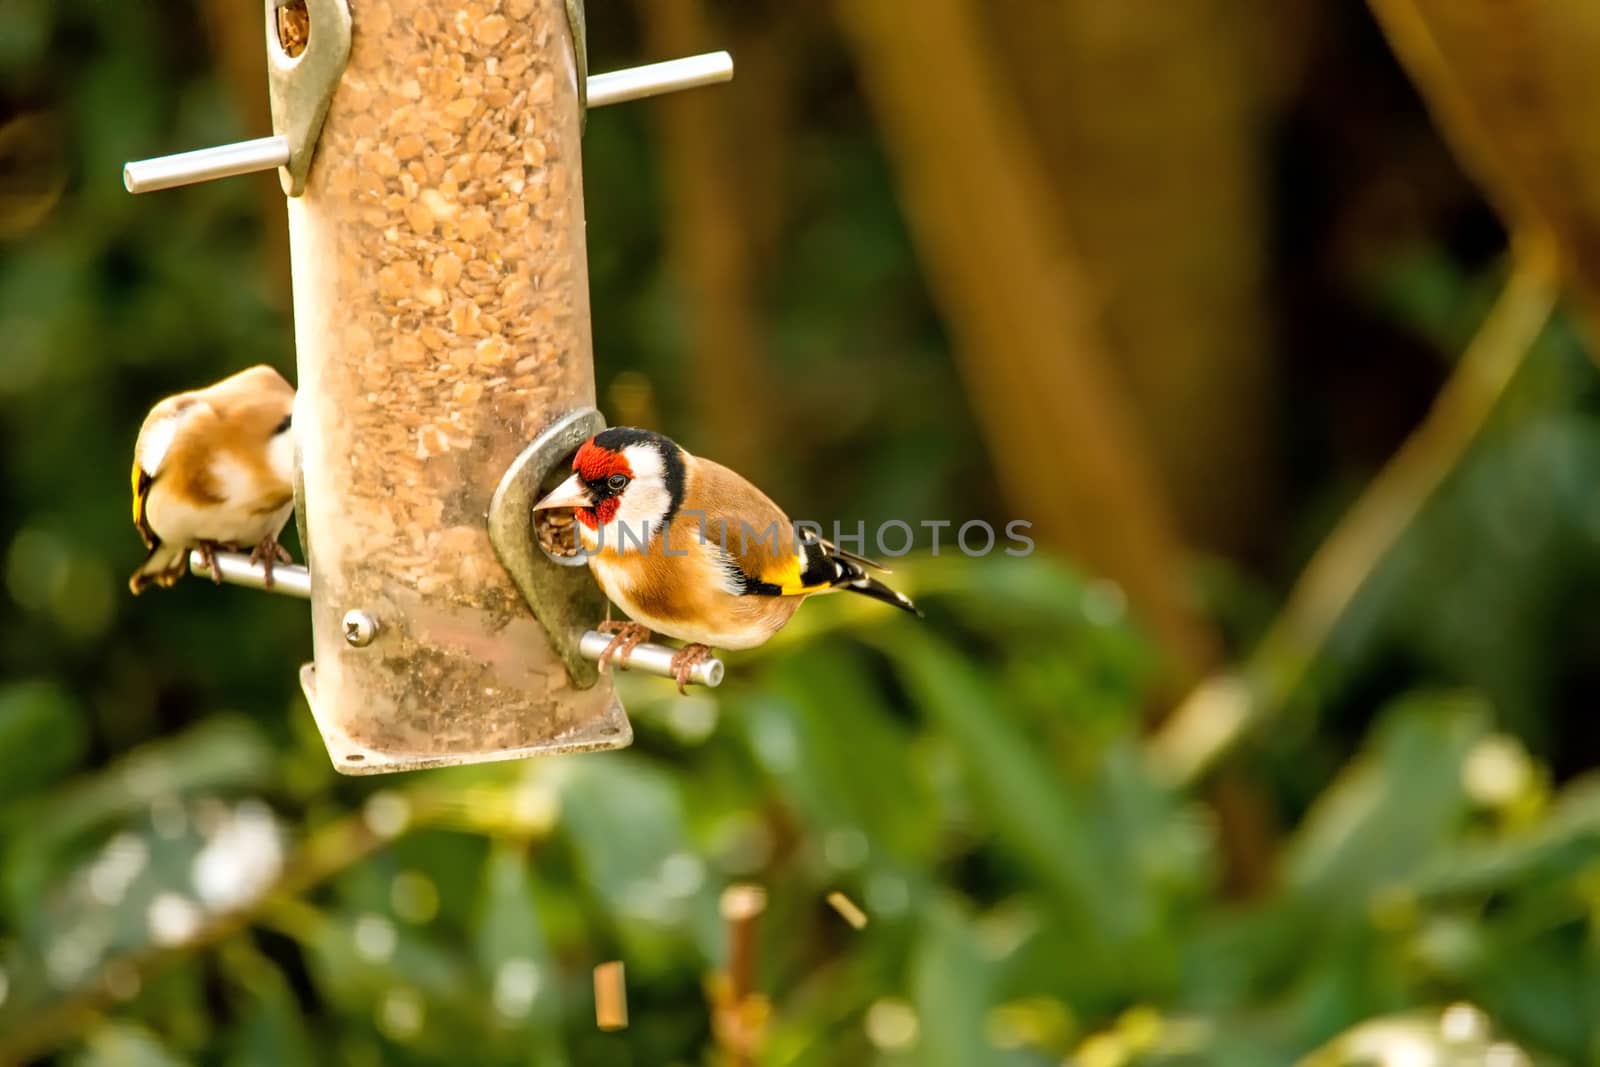 The European goldfinch at a fodder house in Germany by Jochen